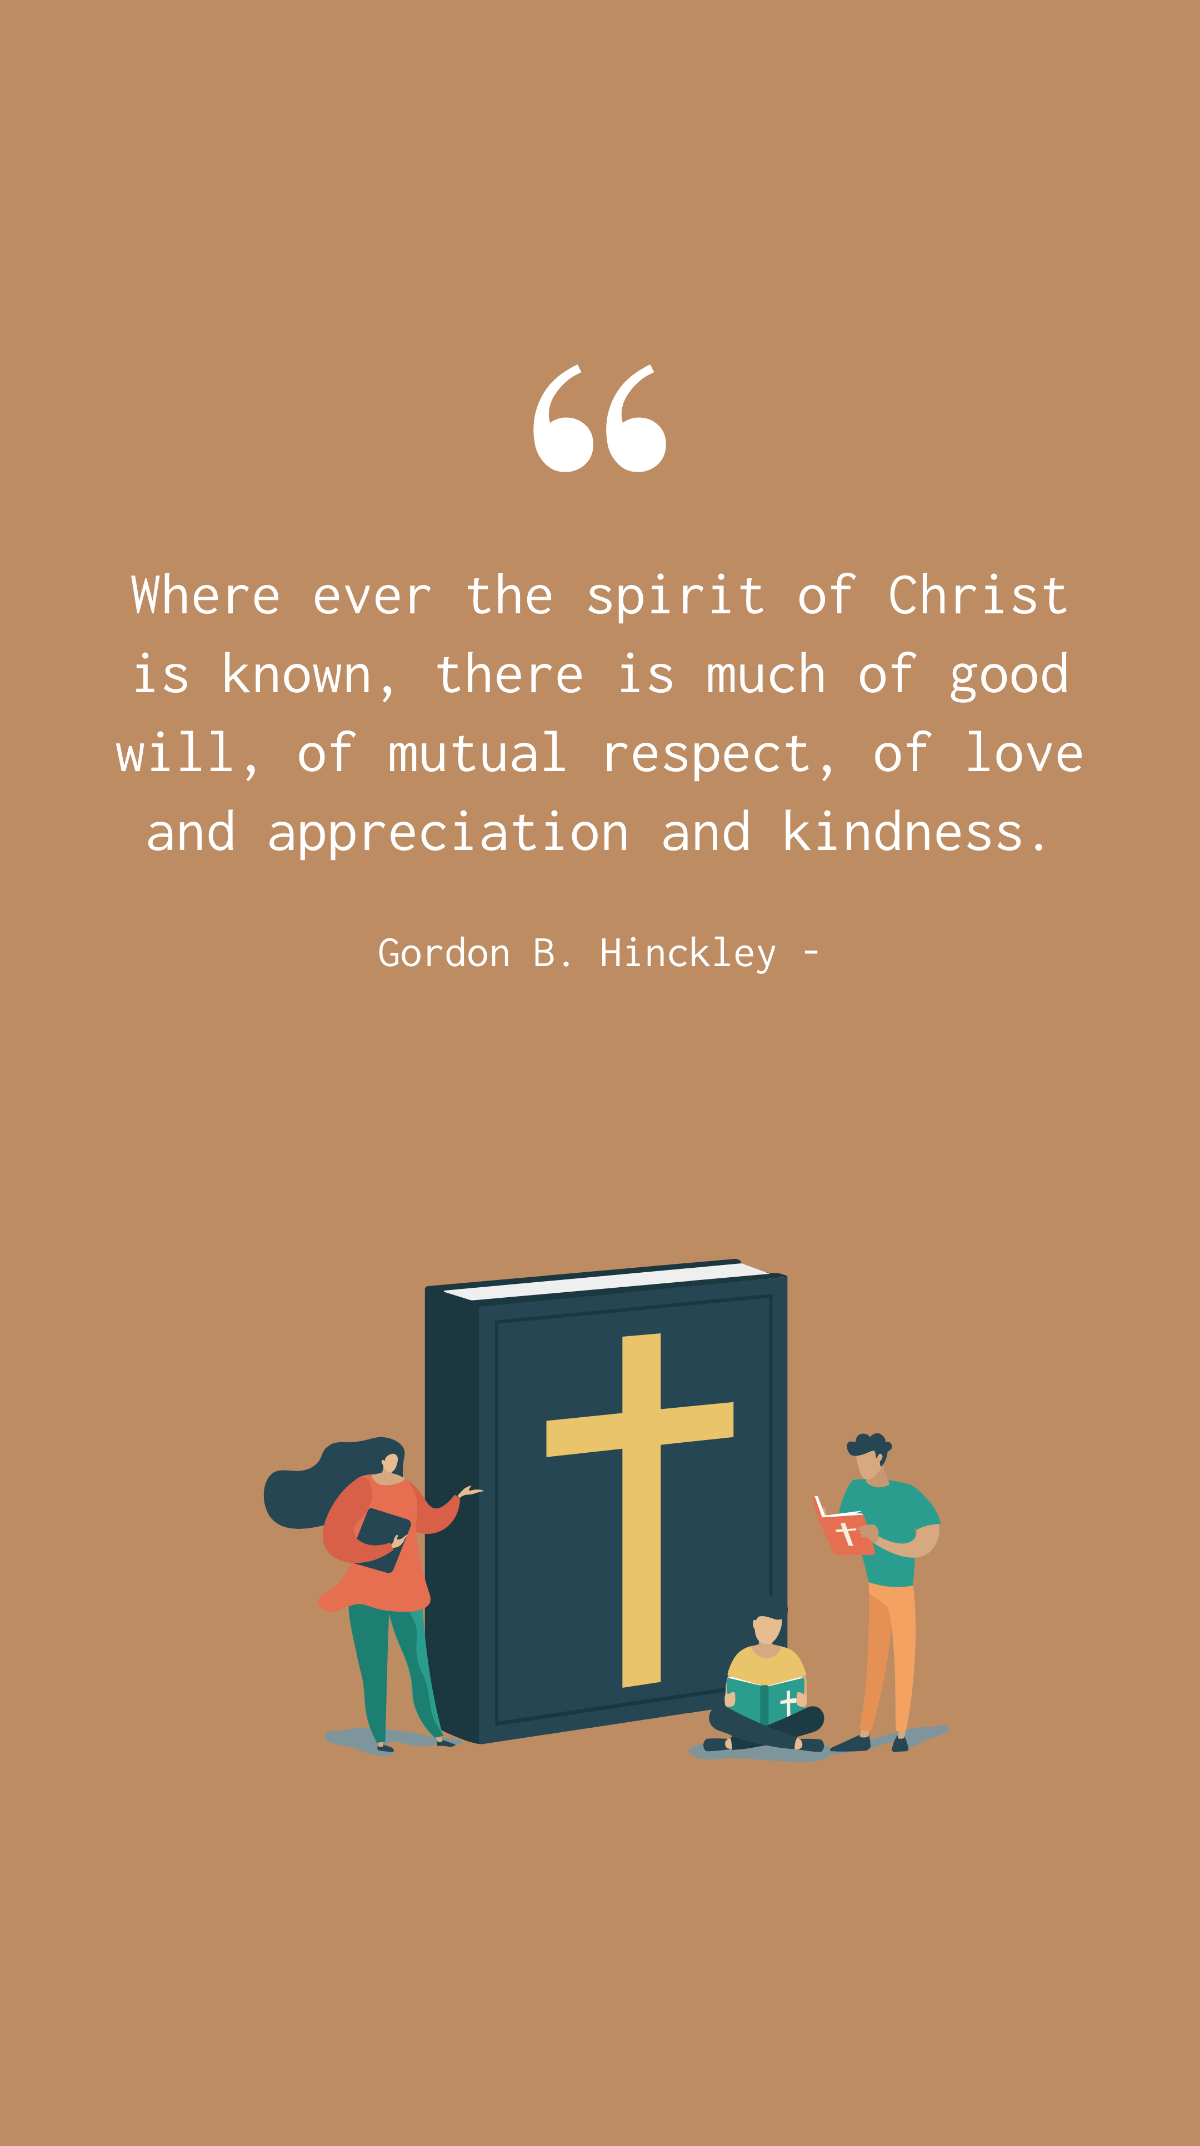 Free Gordon B. Hinckley - Where ever the spirit of Christ is known, there is much of good will, of mutual respect, of love and appreciation and kindness. Template